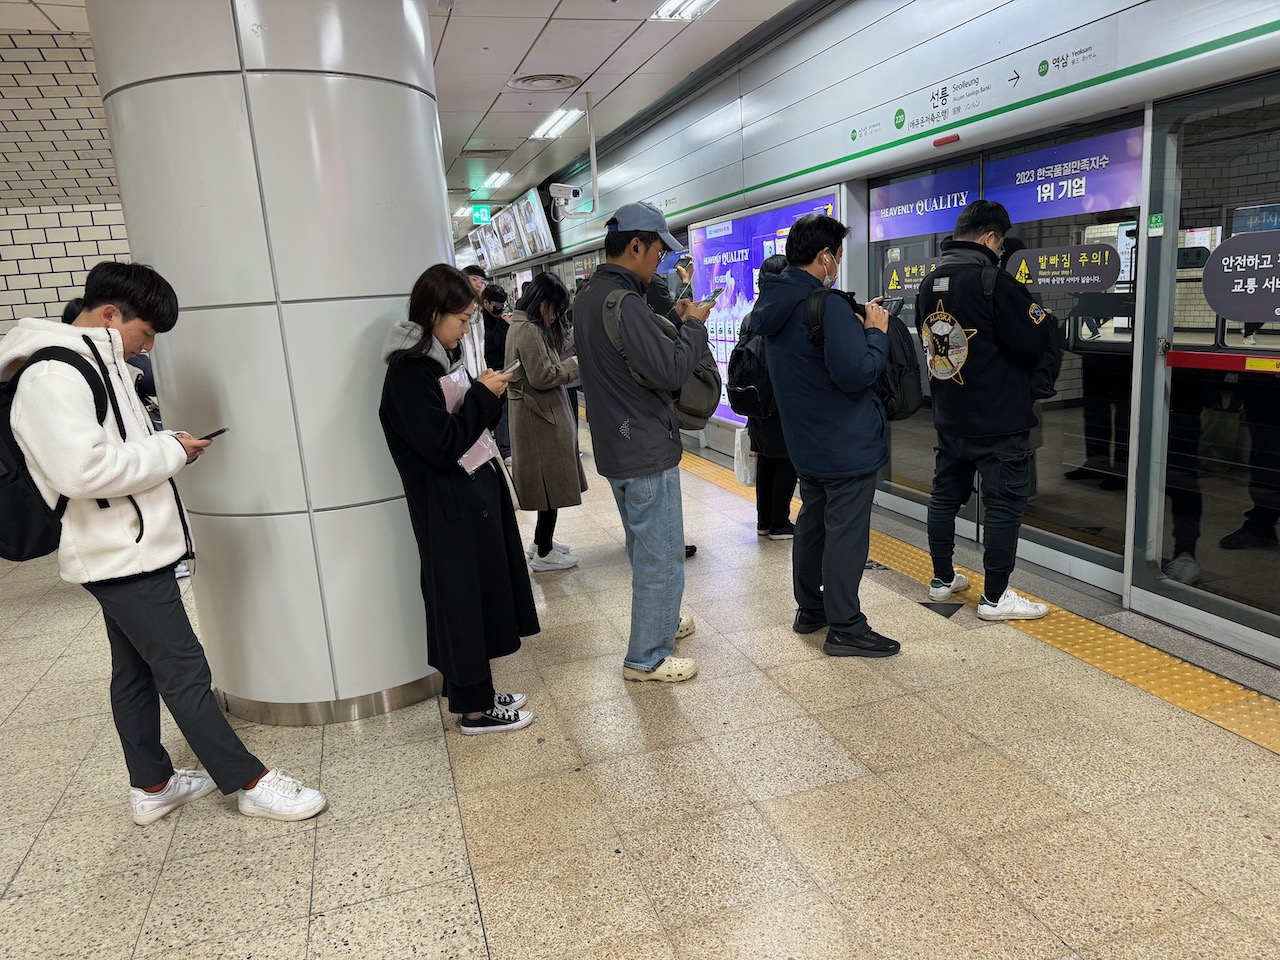 Waiting in the Seoul subway